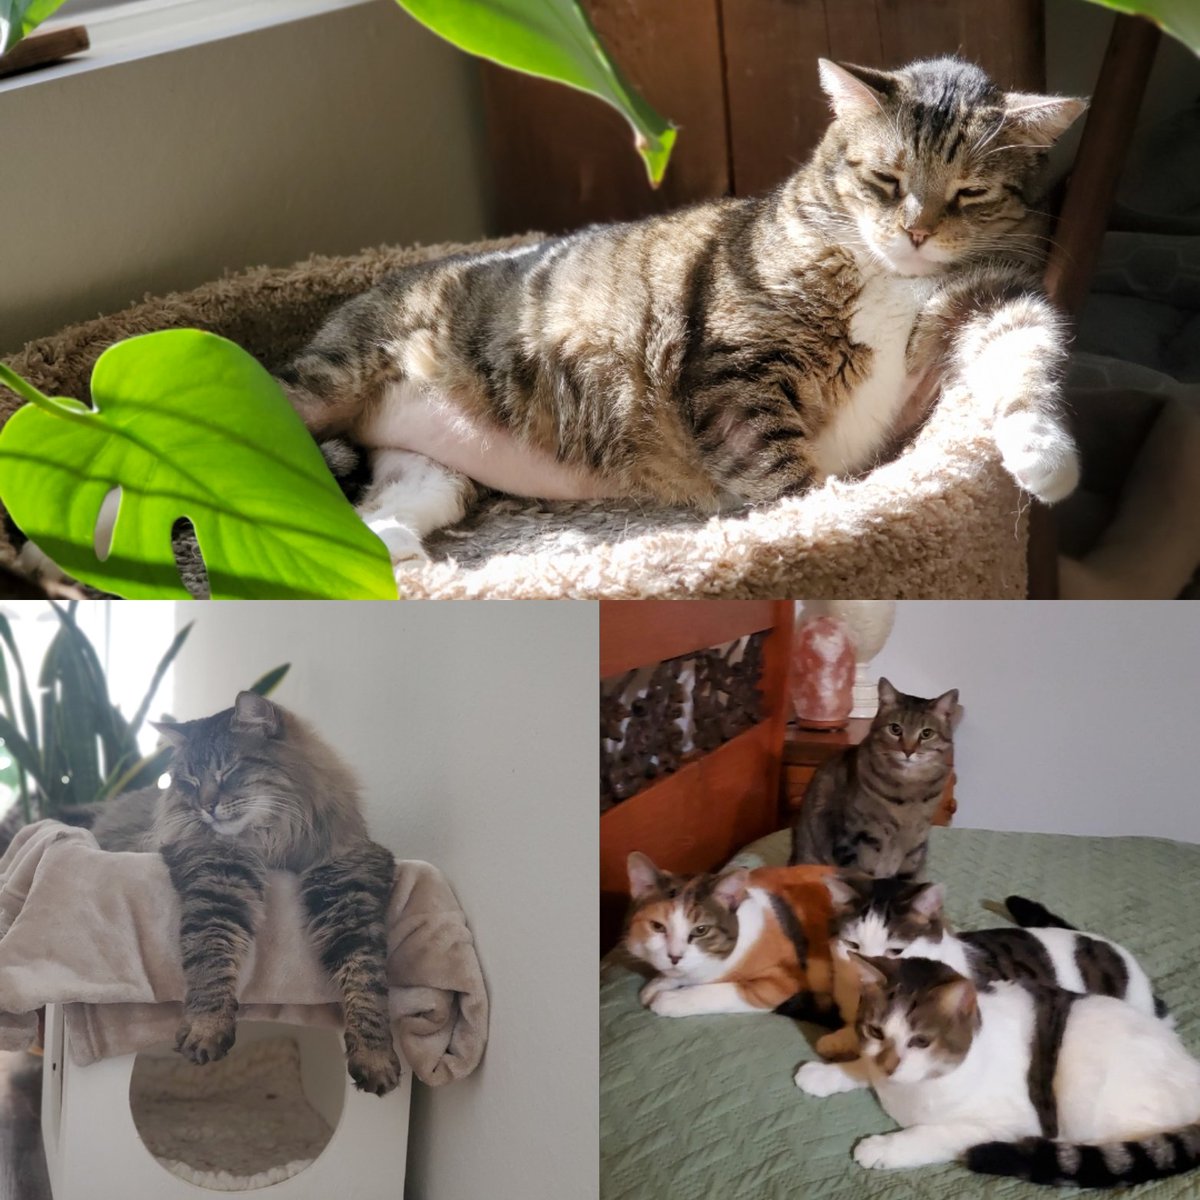 Happy National Pet Day from a few of our favorite furry free loaders 🧡😻💛🐈🐾 #bestfreeloadersever #theyareallfavorites 💛 #theworldismyoyster #catseverywhere #freeloaders  #pieceofmyheart 
#adopt #rescue #foster #donate #educate #network #itsacatslife  #sheltercat #savealife